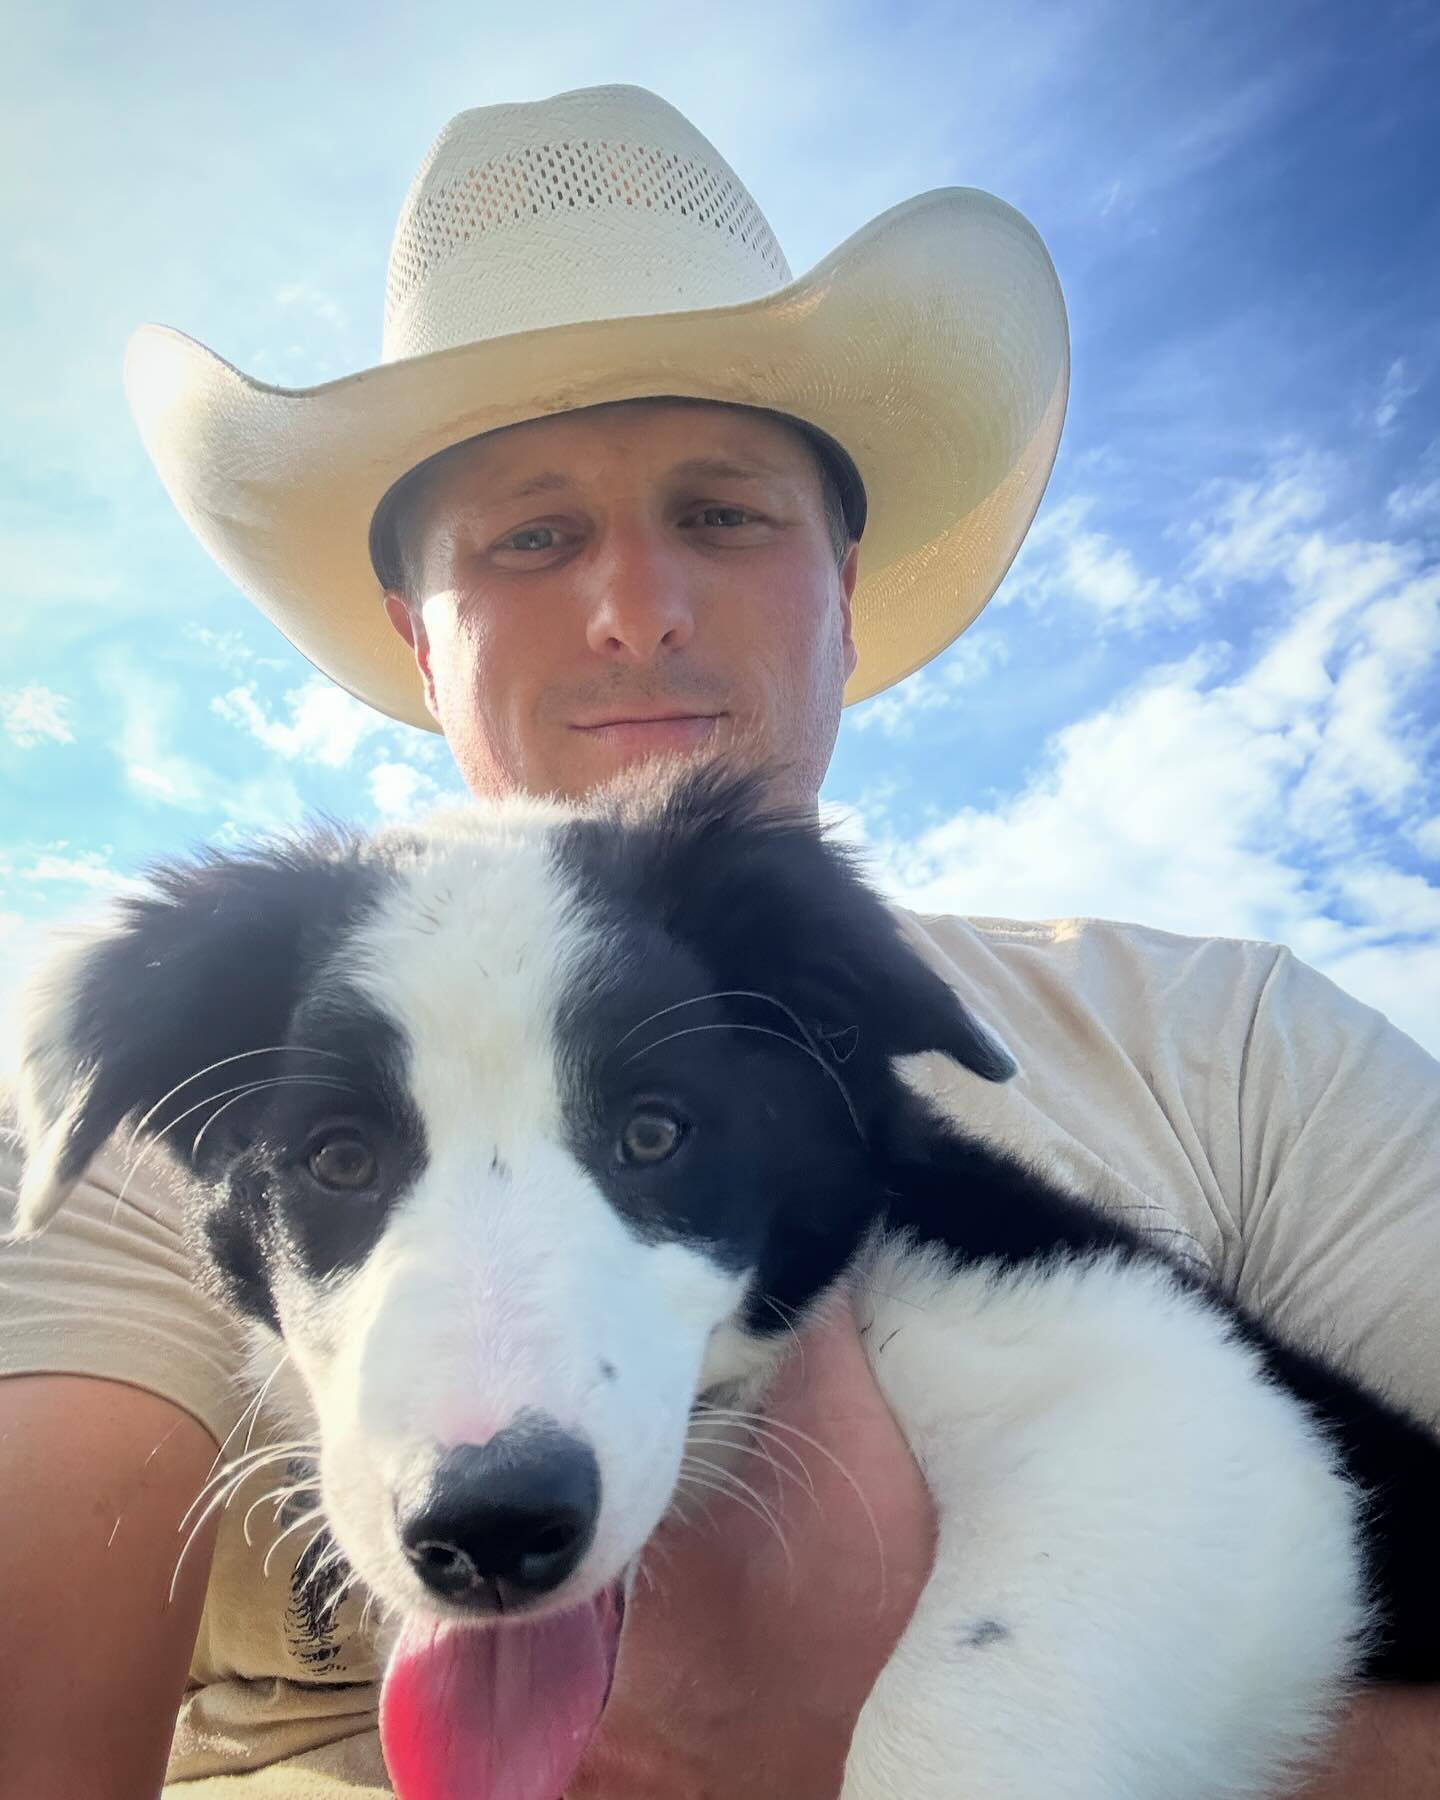 Happy 1st Birthday Angus!

Your huggin sticks (arms), square head, and keen personality are all a solid 10/10 and will serve you well in life. Keep up the great work tiny guy 🐾❤️🐾

____

#bordercollie #australianshepard #cowdog #dogsofinstagram